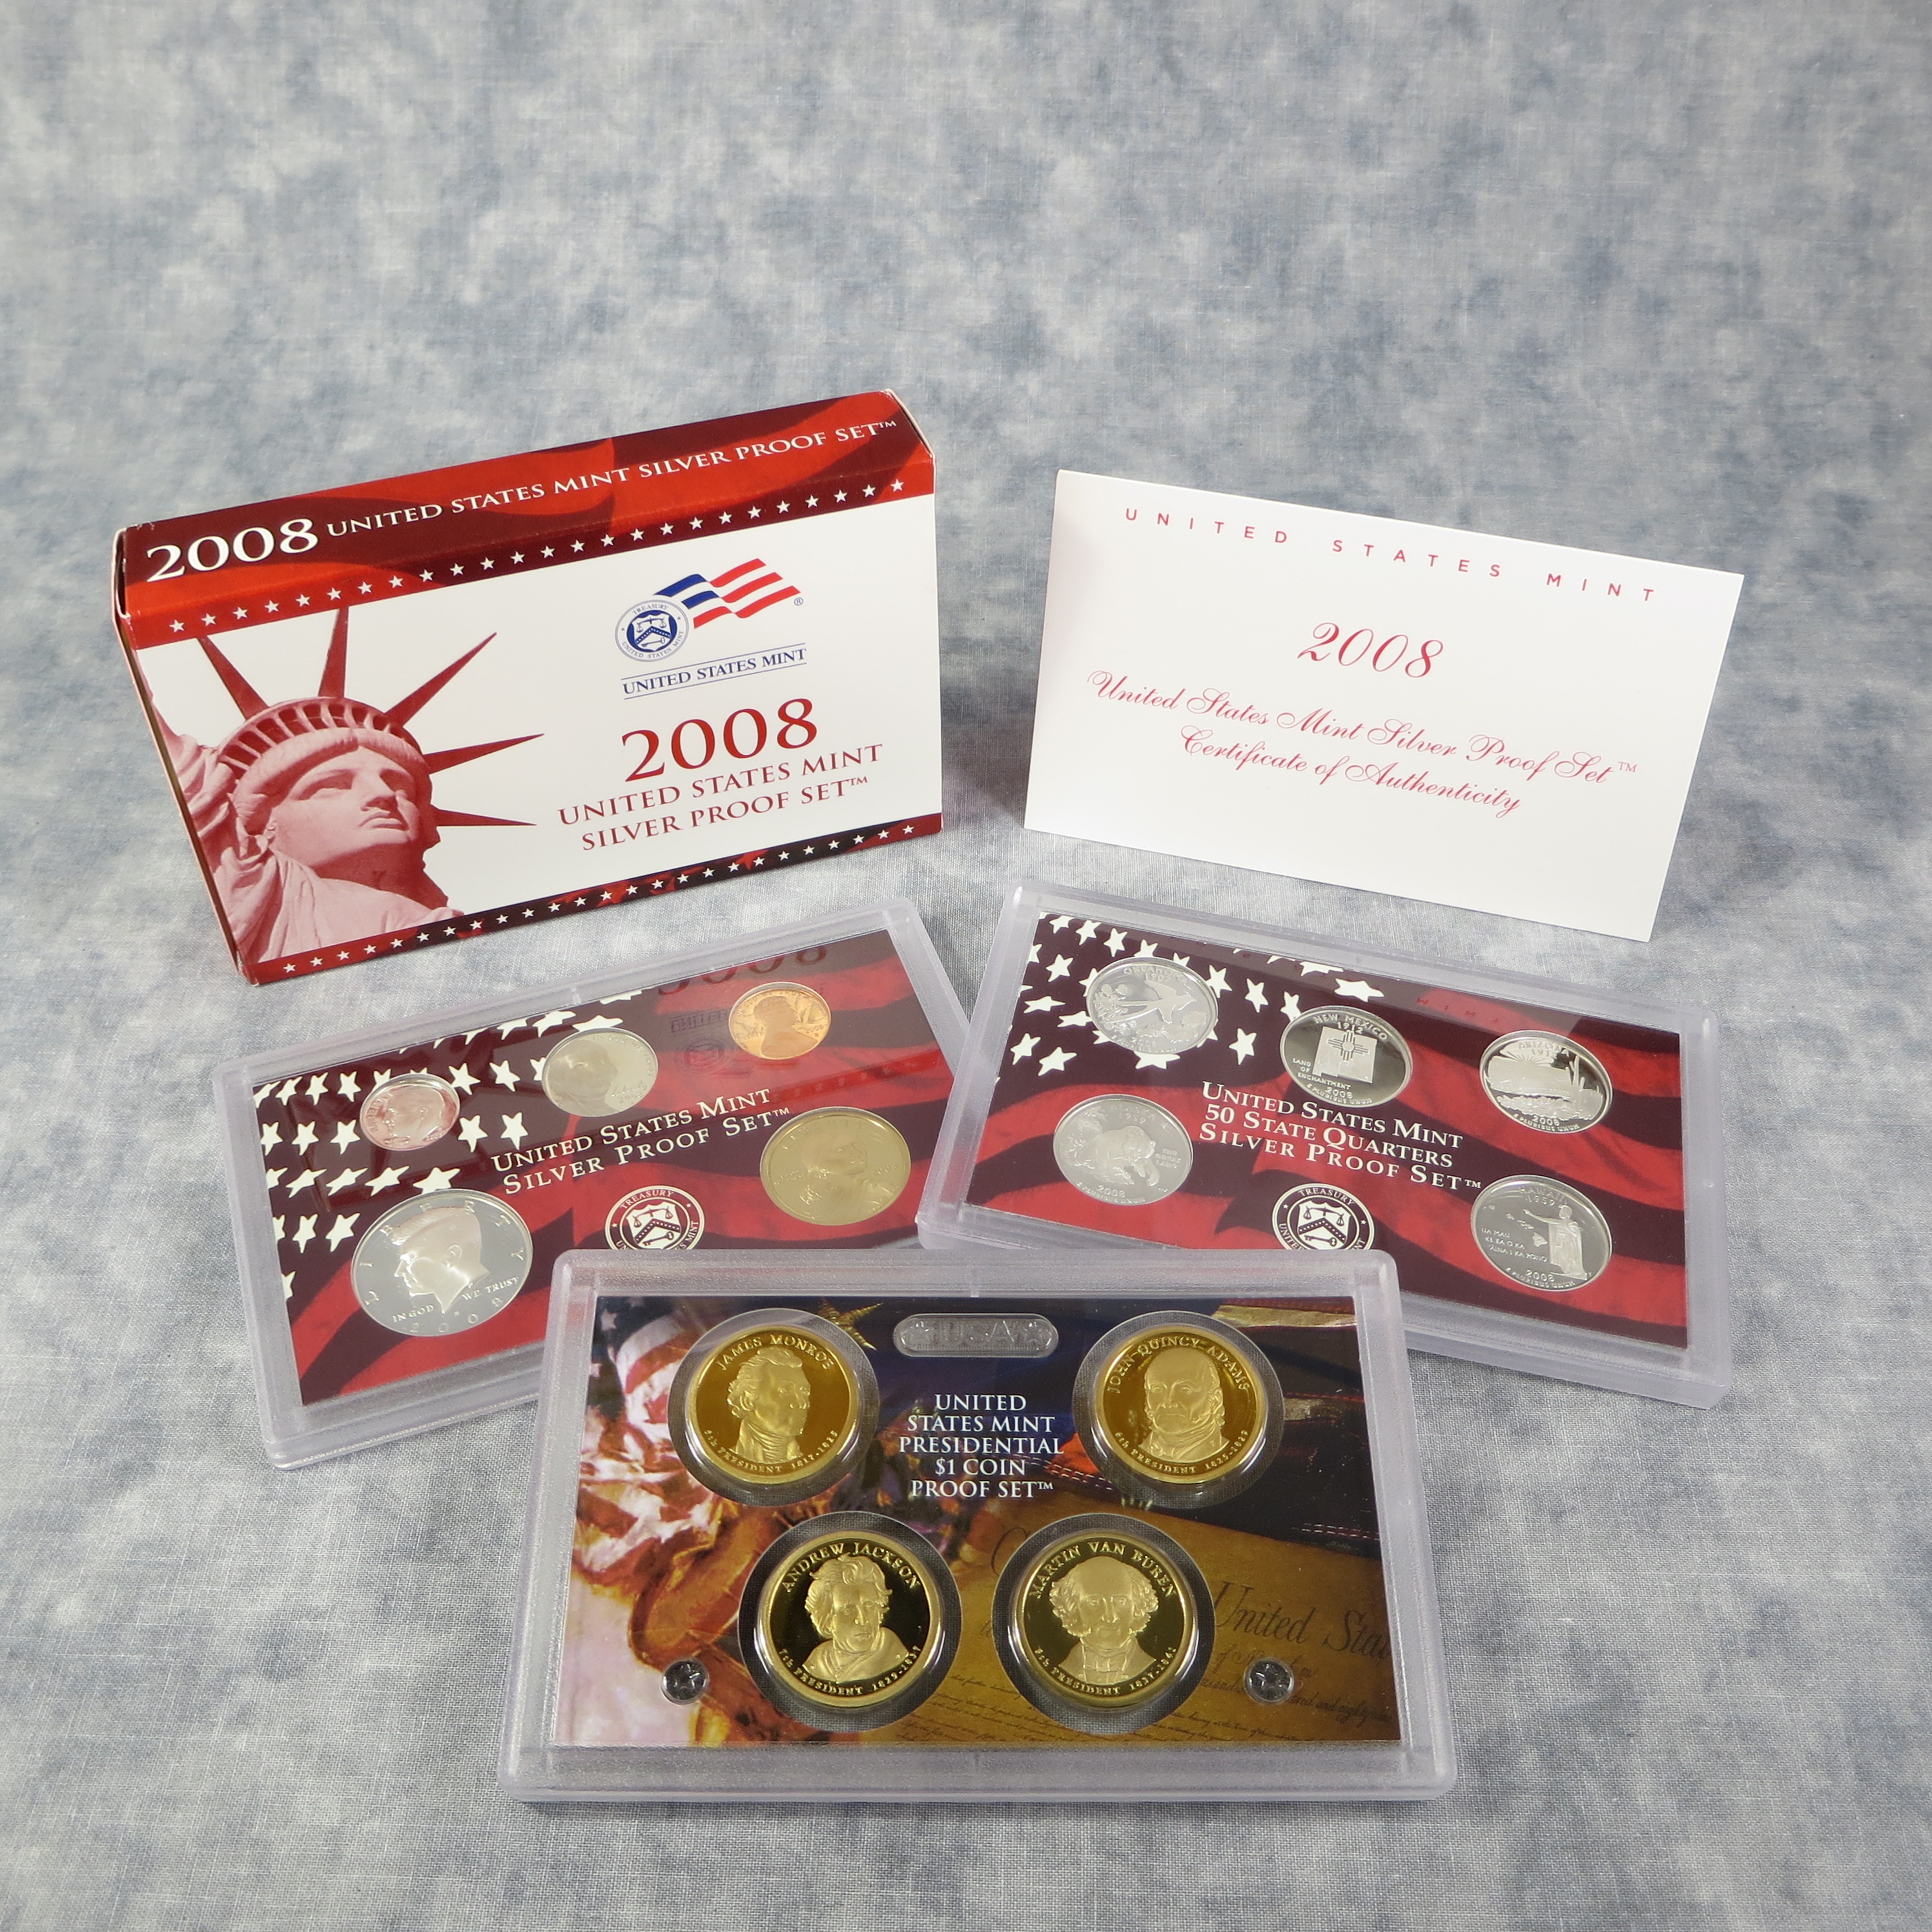 Mint Presidential 1$ Dollar Coin Proof Set Complete With Box & COA 2008 U.S